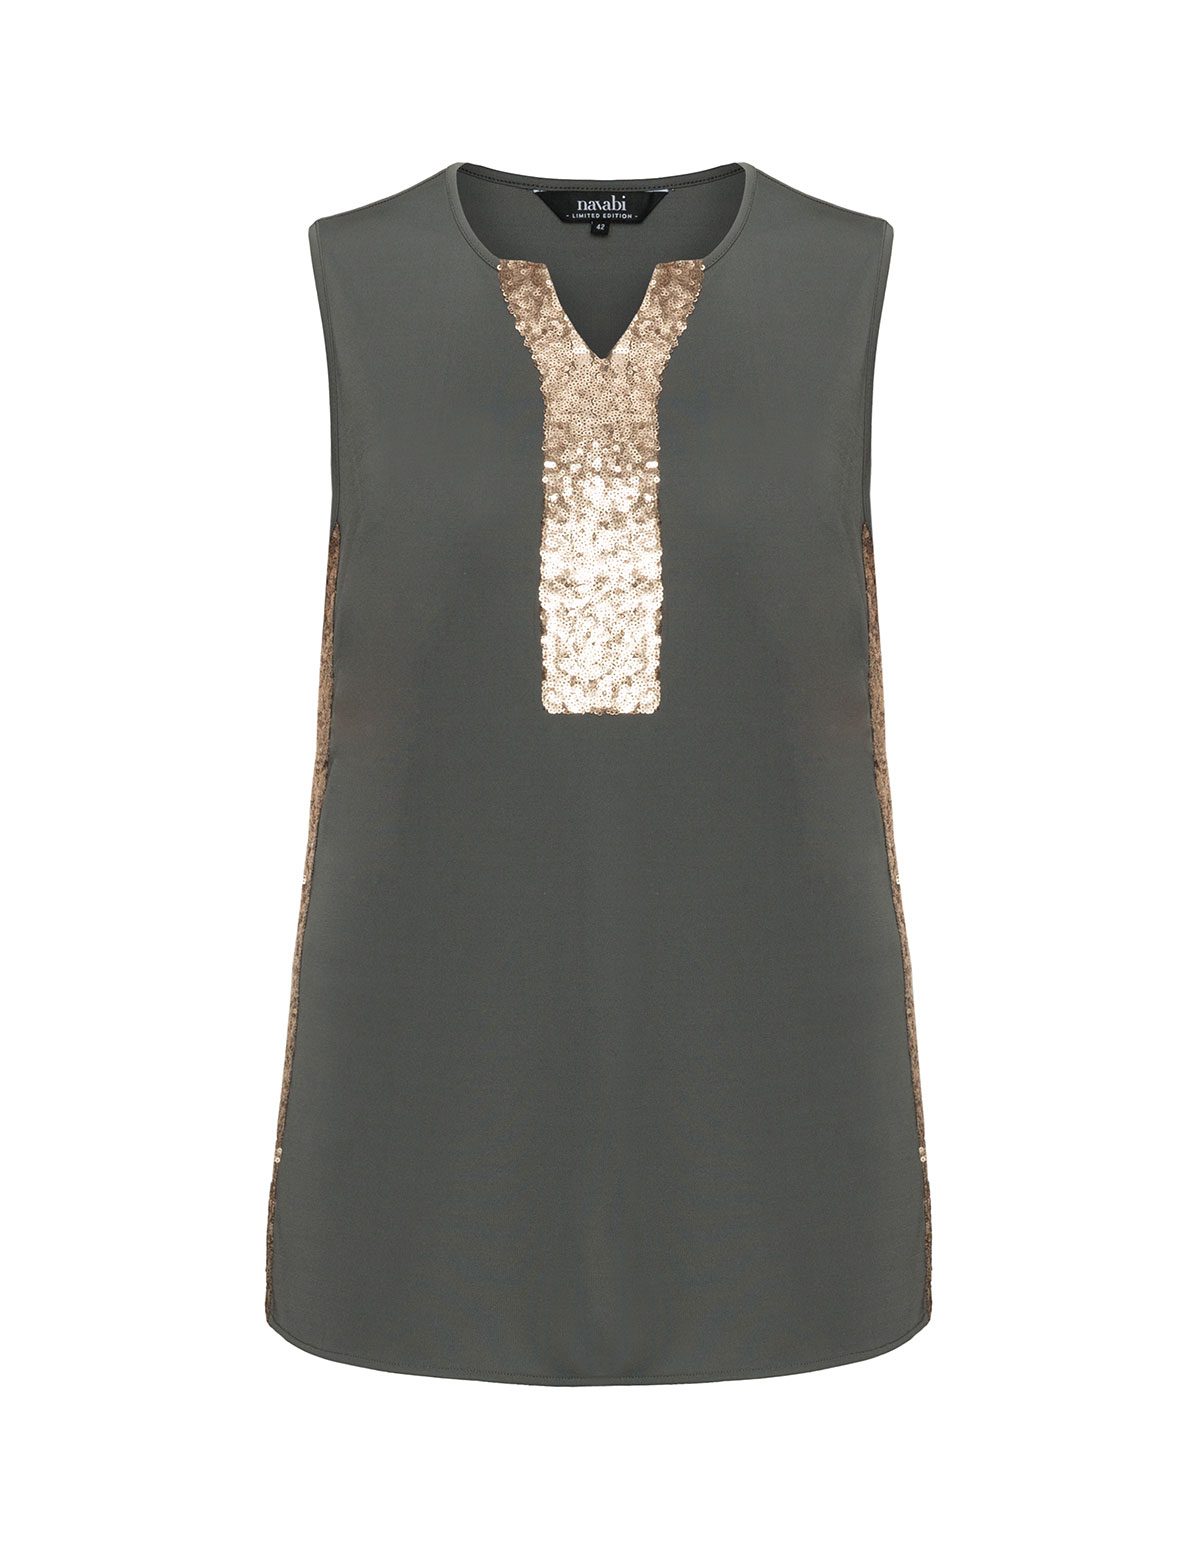 Sequin embellished jersey top by
navabi